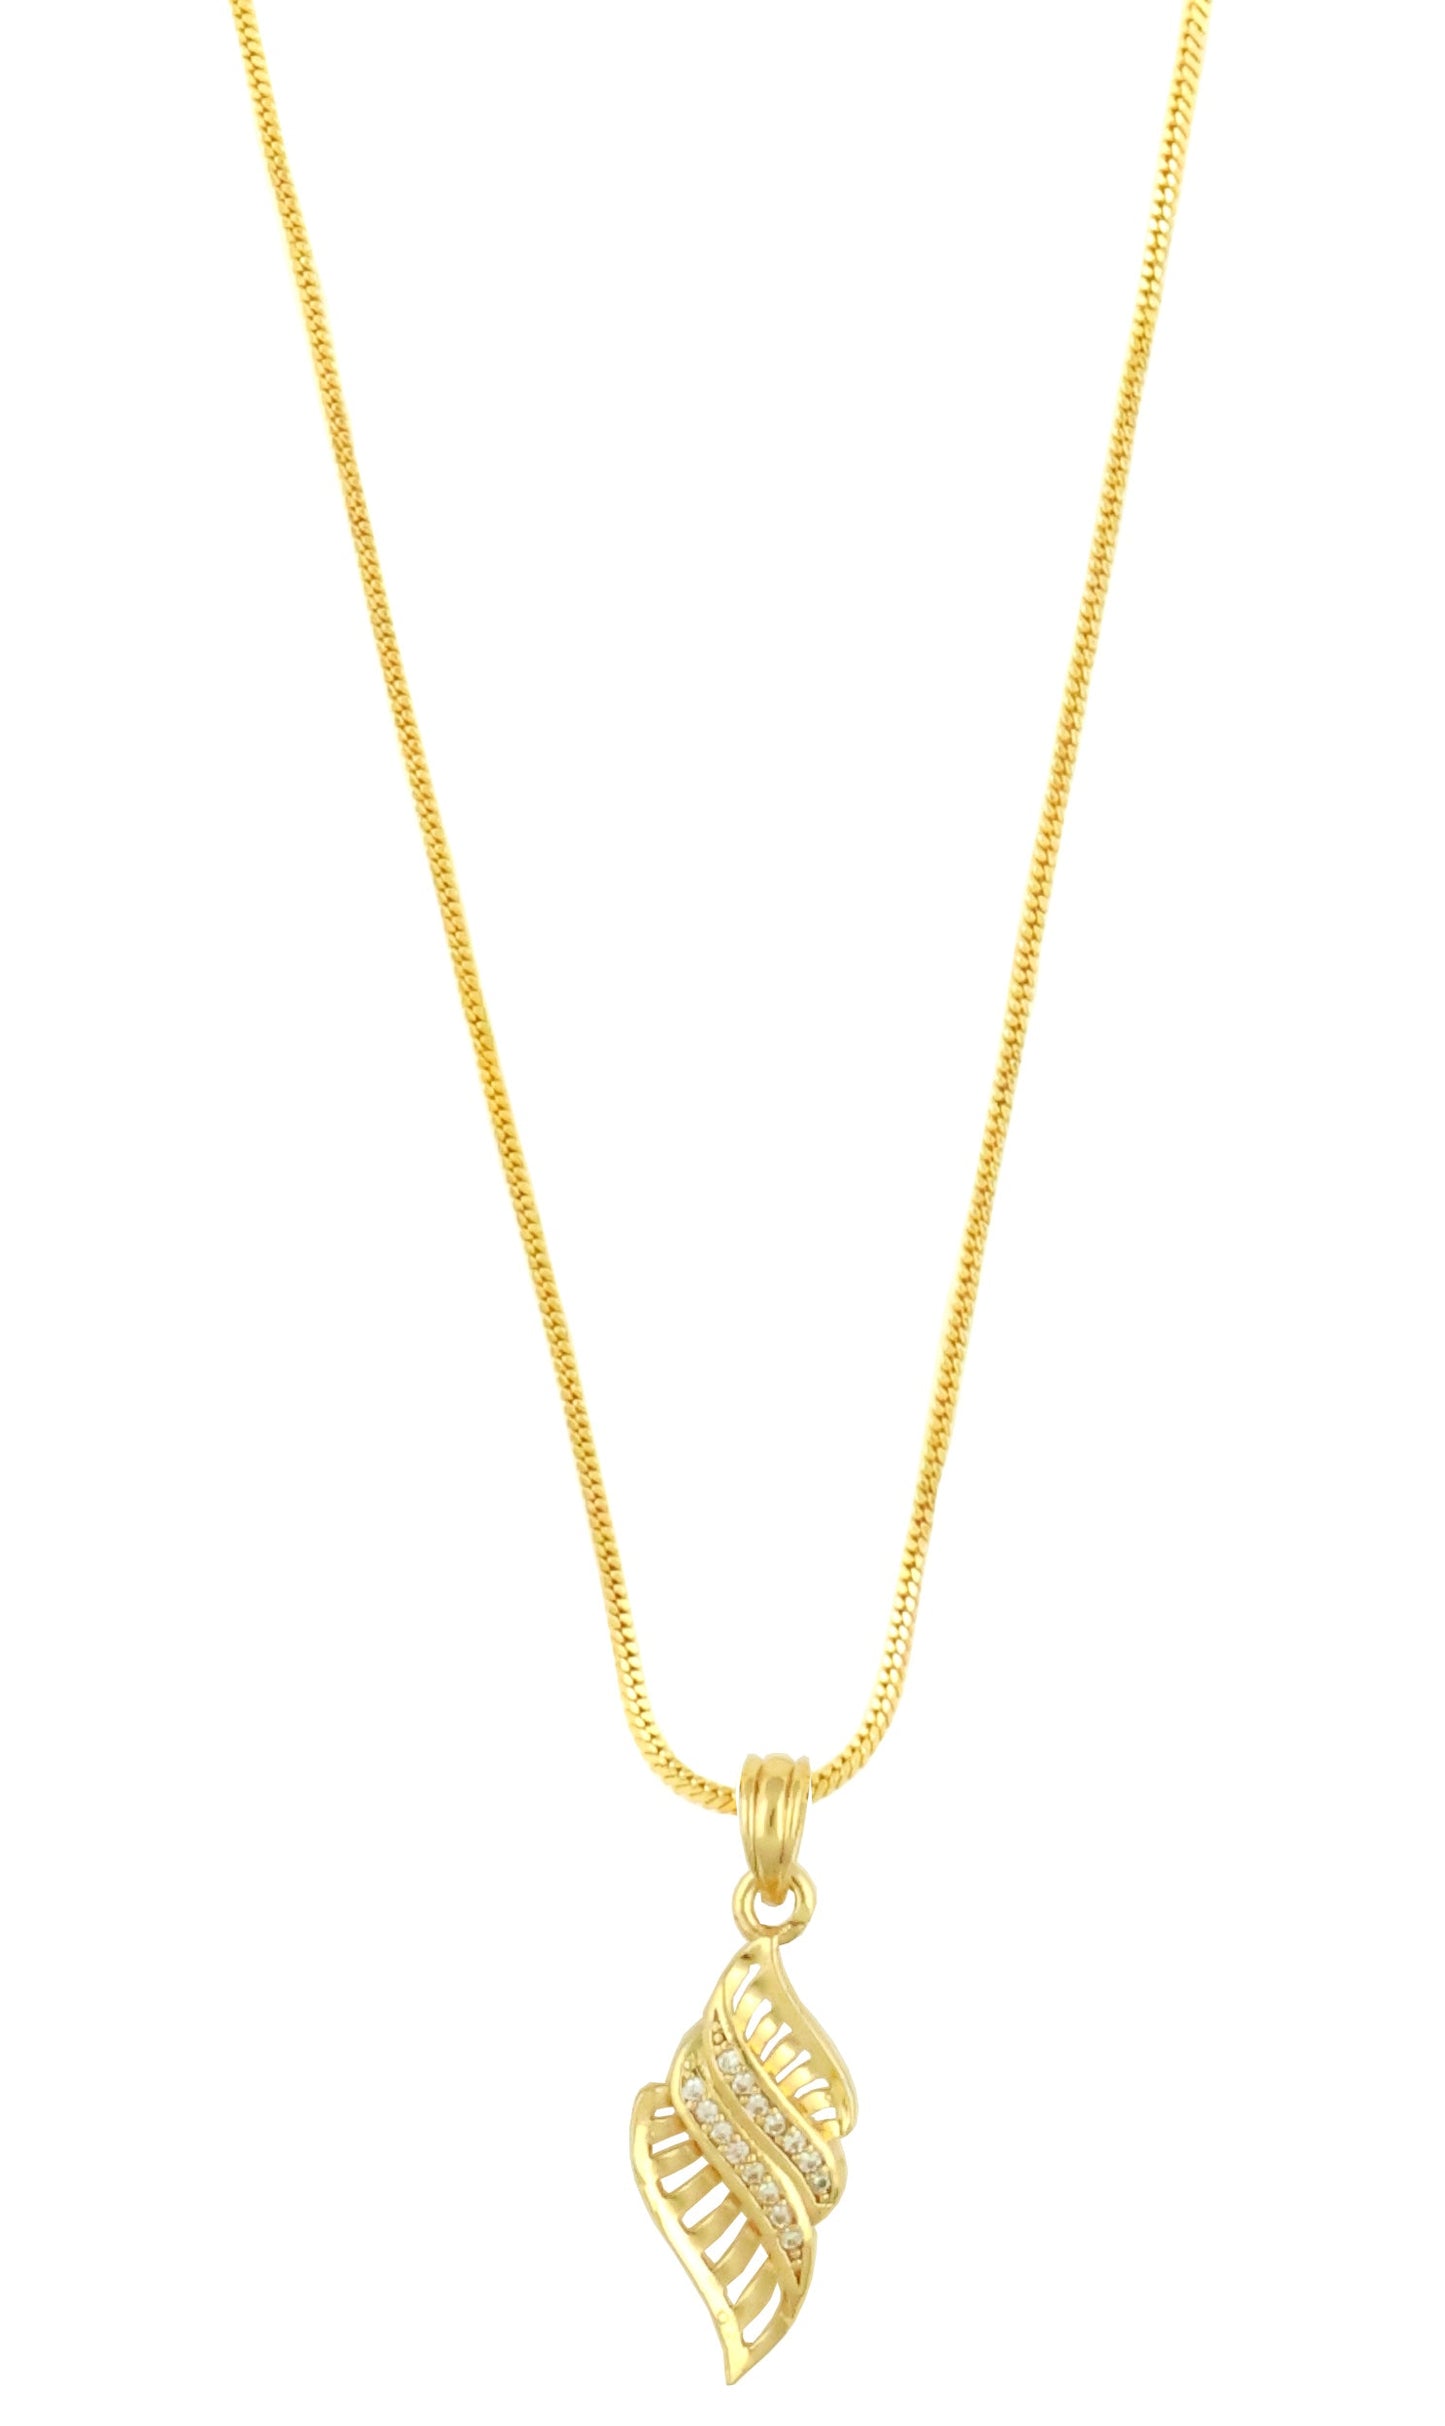 Mekkna Gold Plated Combo of Pendant Collection - Shop Now!